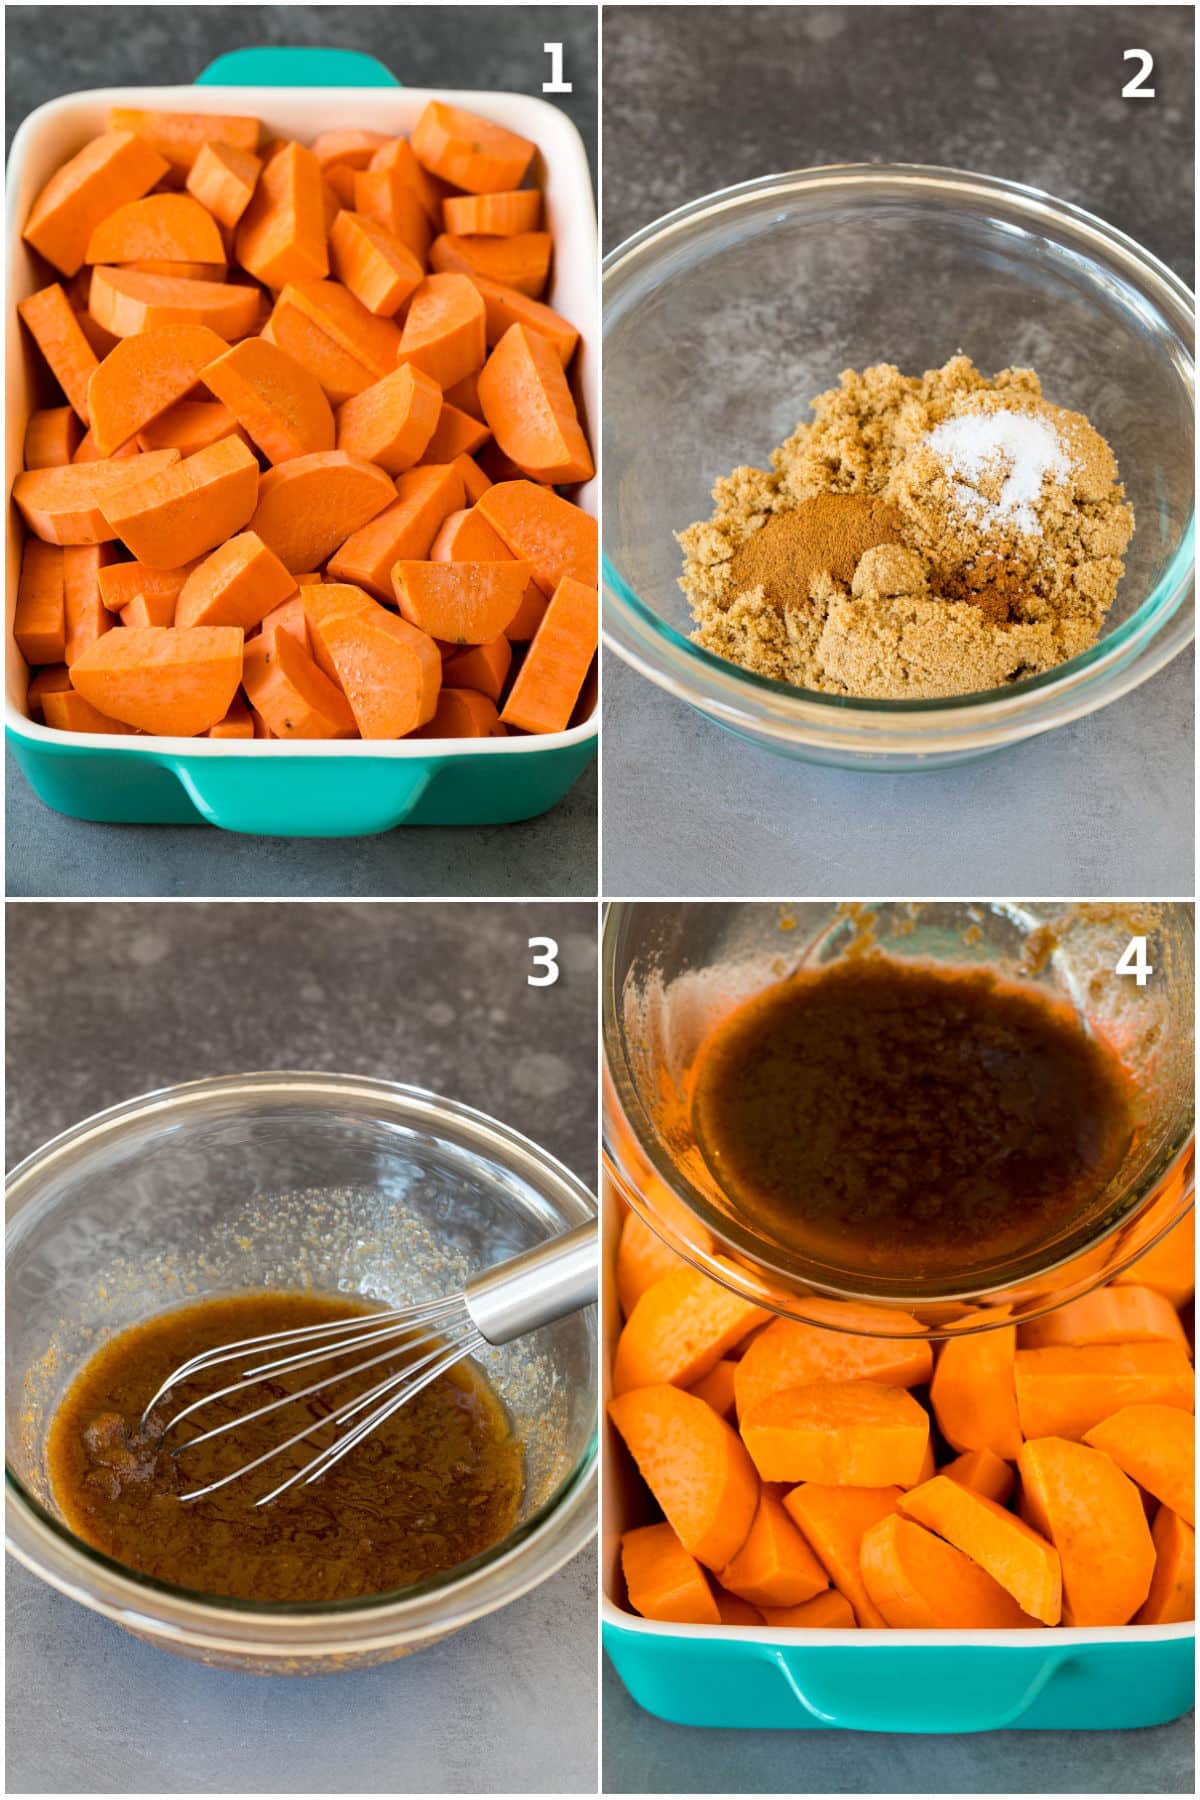 Step by step shows showing how to make brown sugar sauce for sweet potatoes.